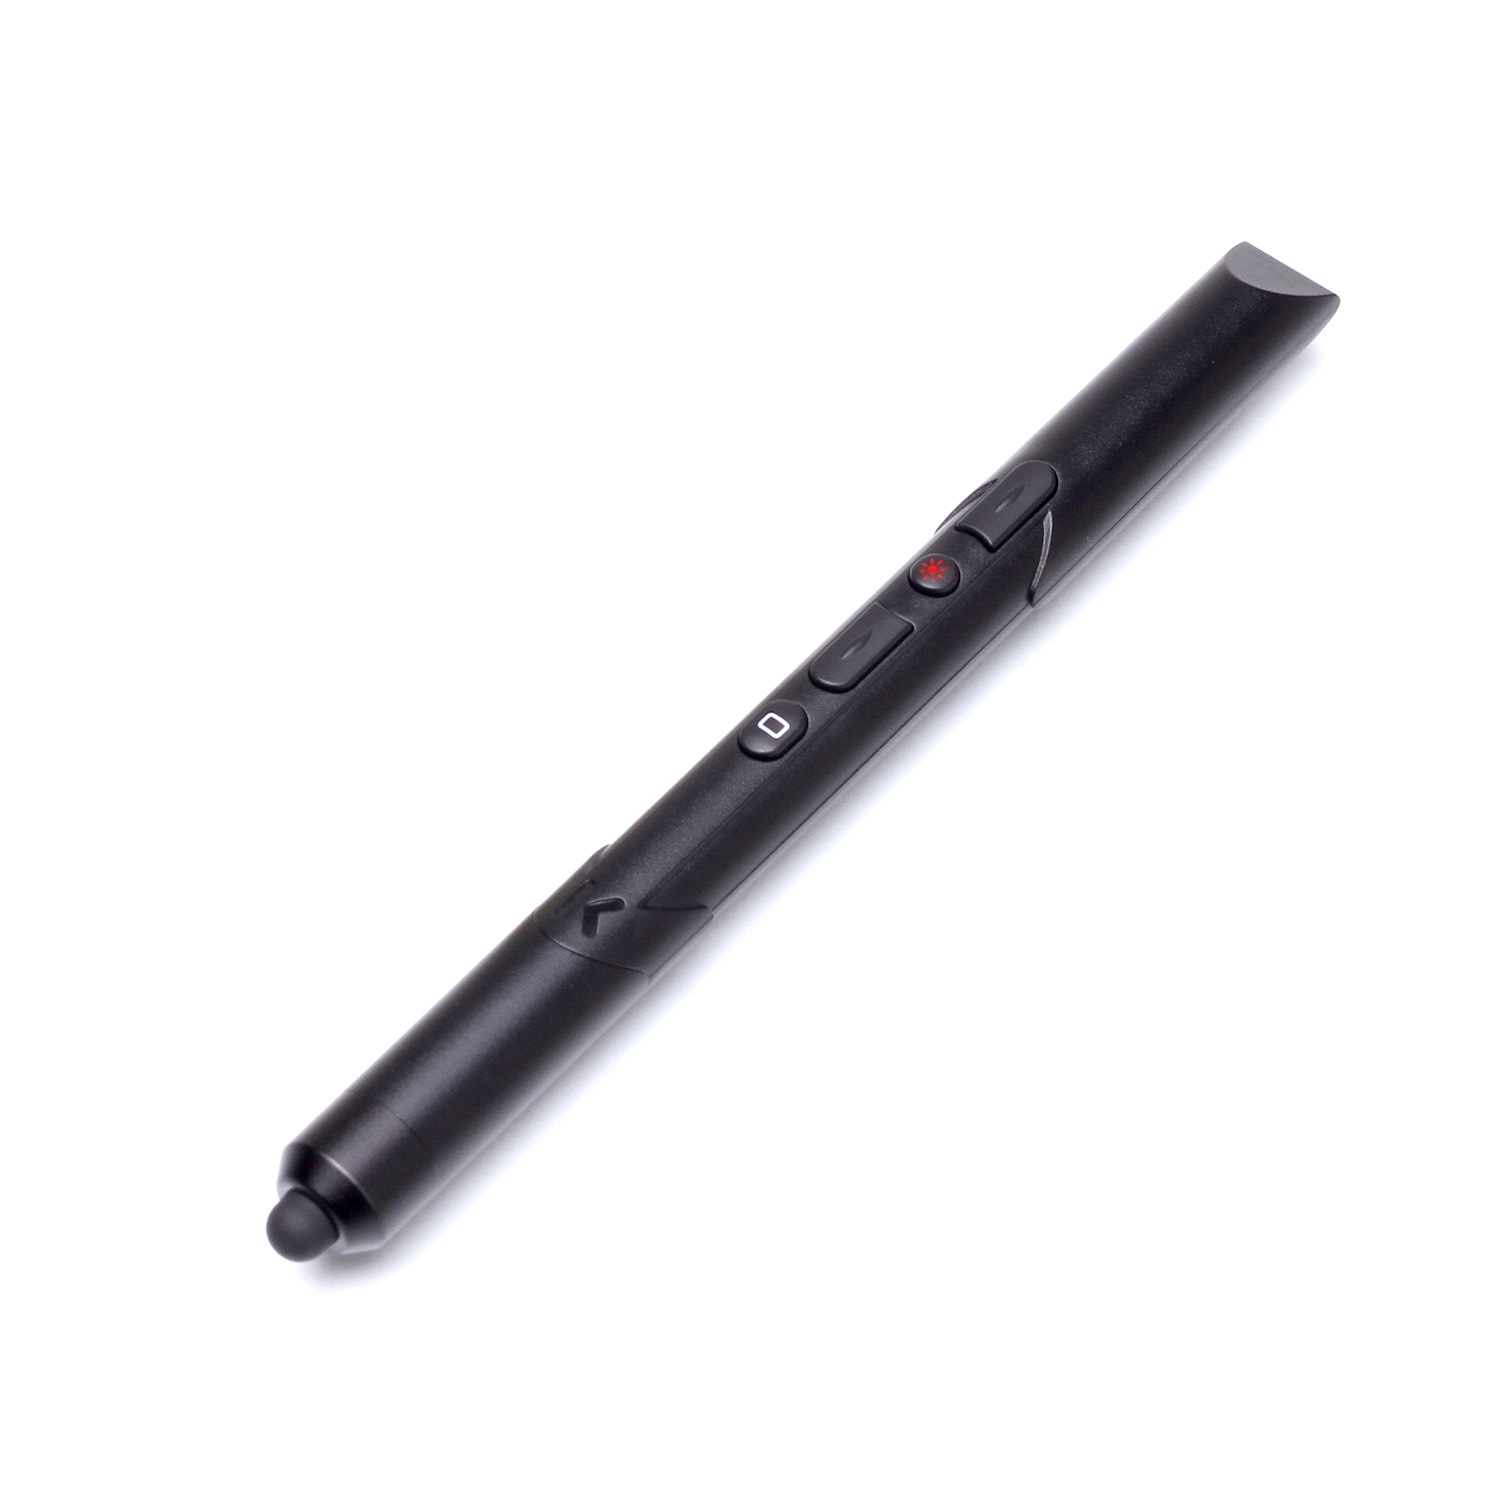 VIBOTON 3 in 1  Flip Pen Touch-sensitive Pen Red Light Indication Wireless Presenter PPT Page Pen Clicker USB Remote Control